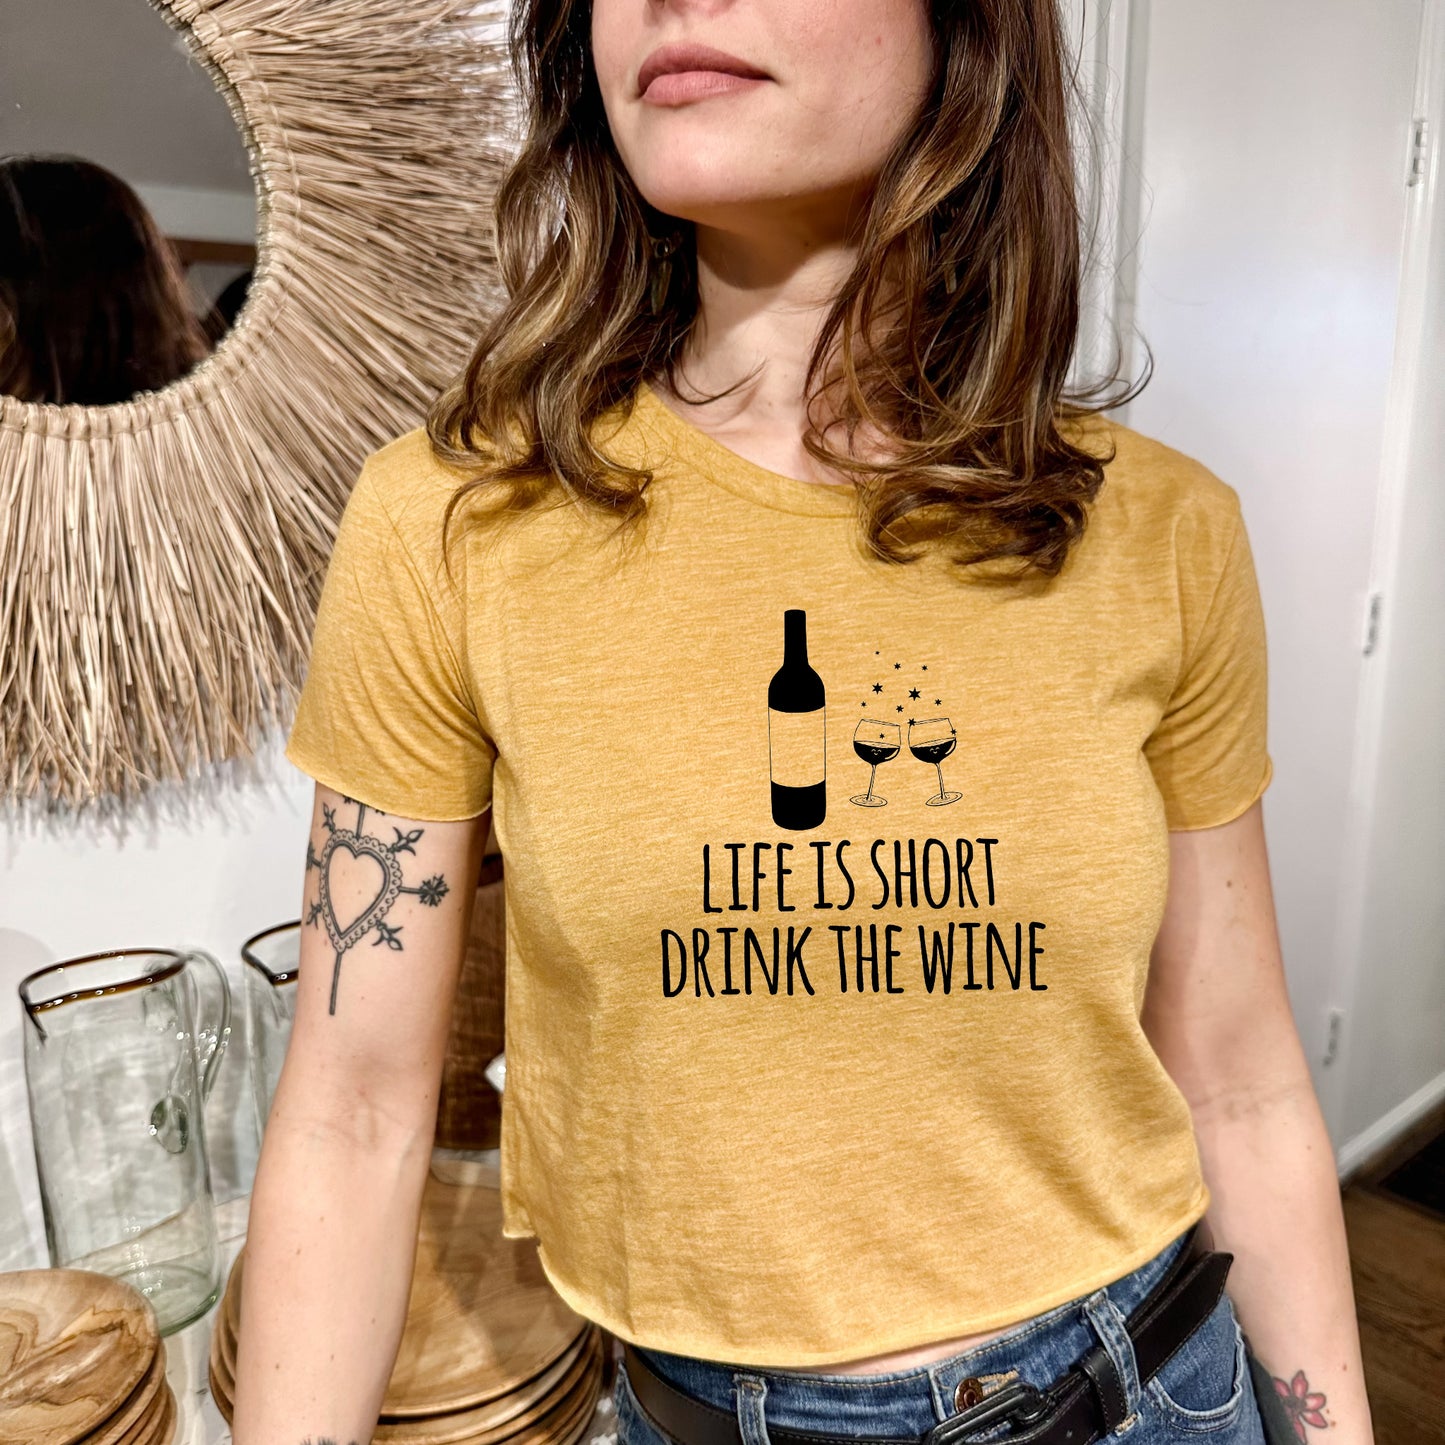 Life Is Short, Drink The Wine - Women's Crop Tee - Heather Gray or Gold